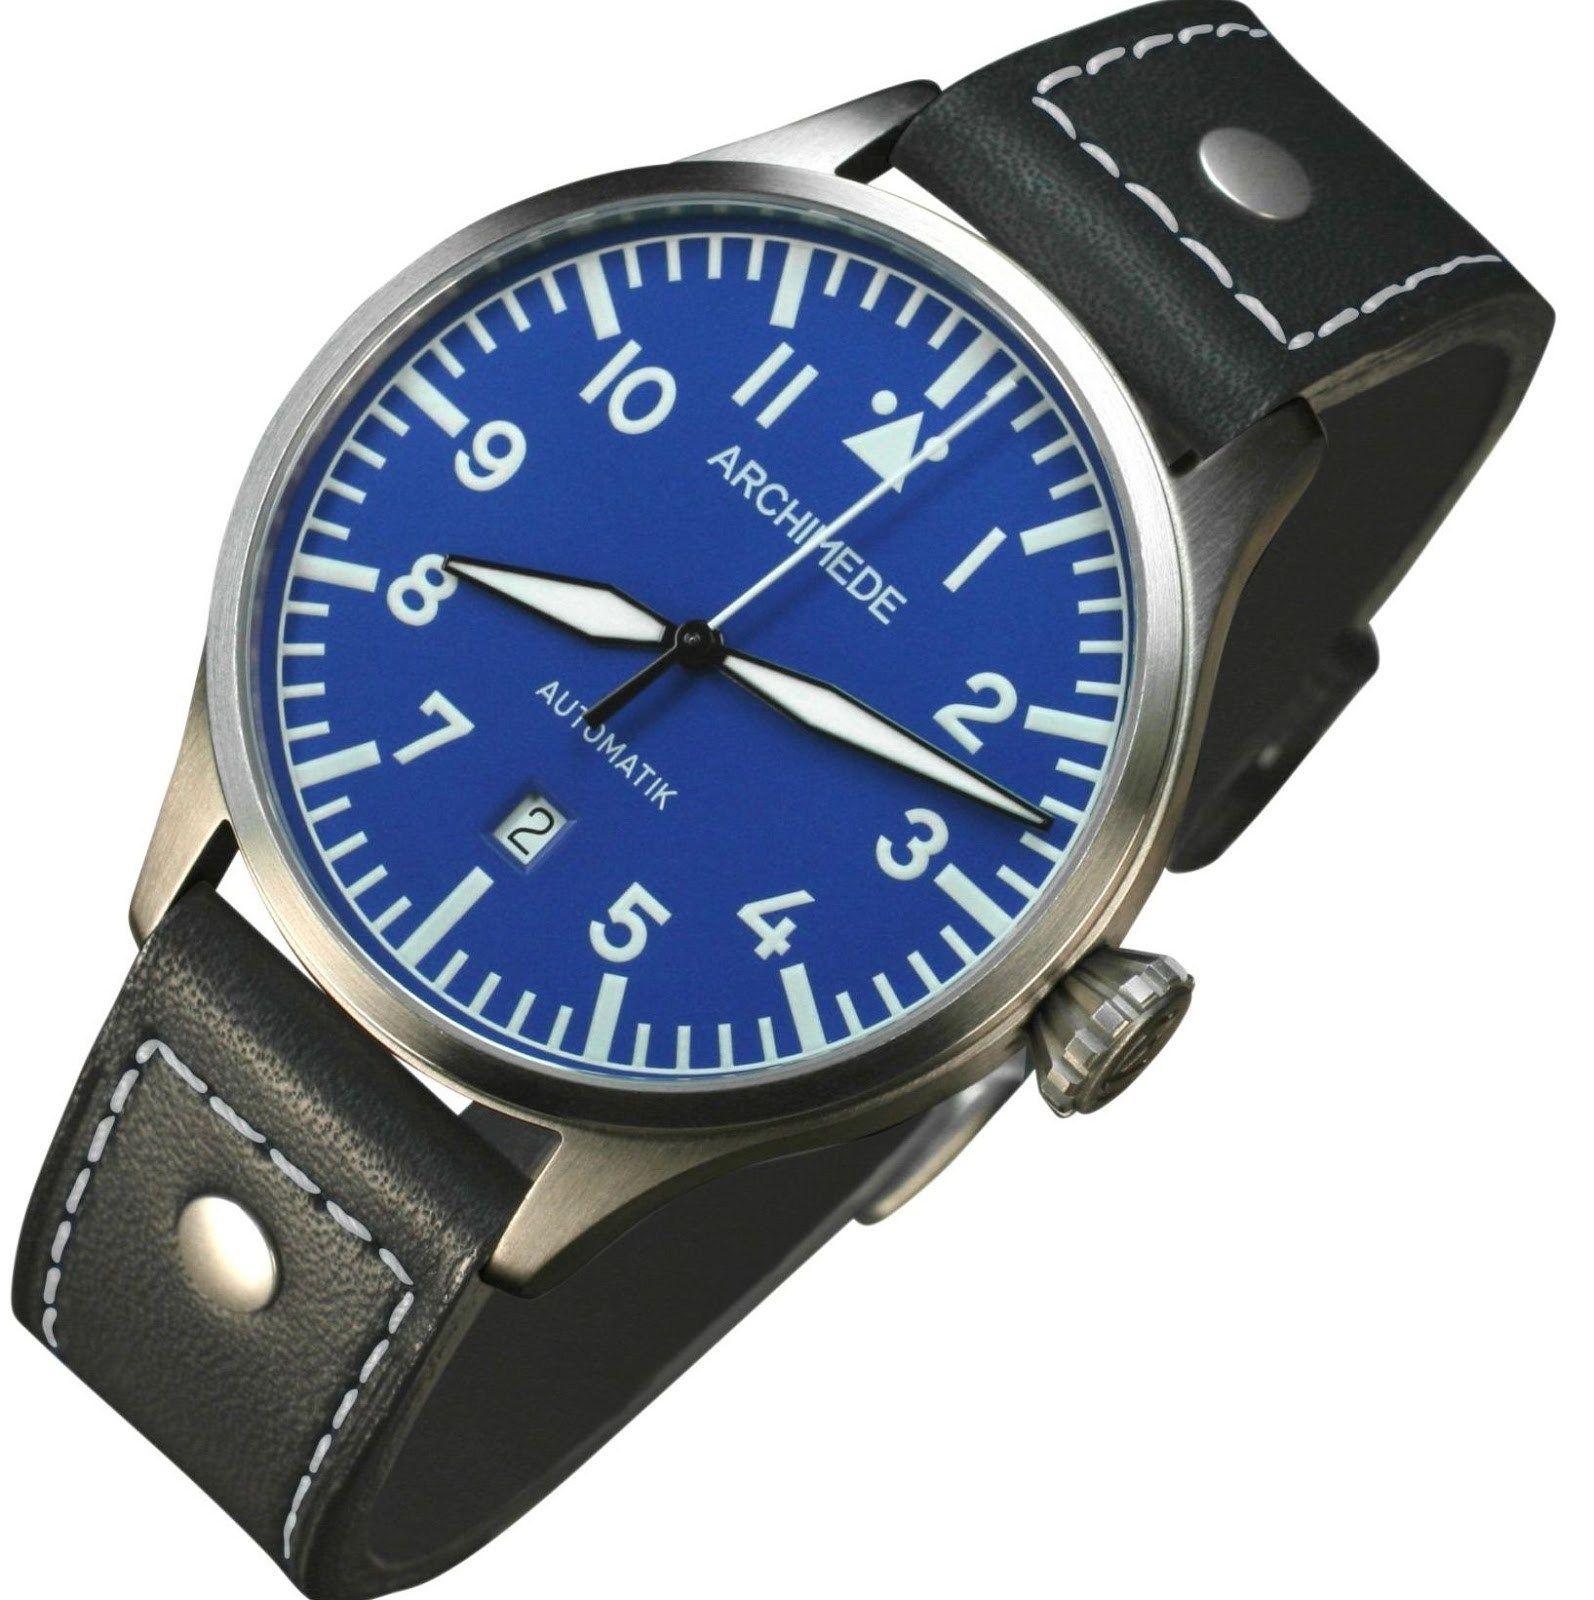 Blue and Bronze Logo - ARCHIMEDE Pilot 42 BL New Fliegerwatch with Blue Dial